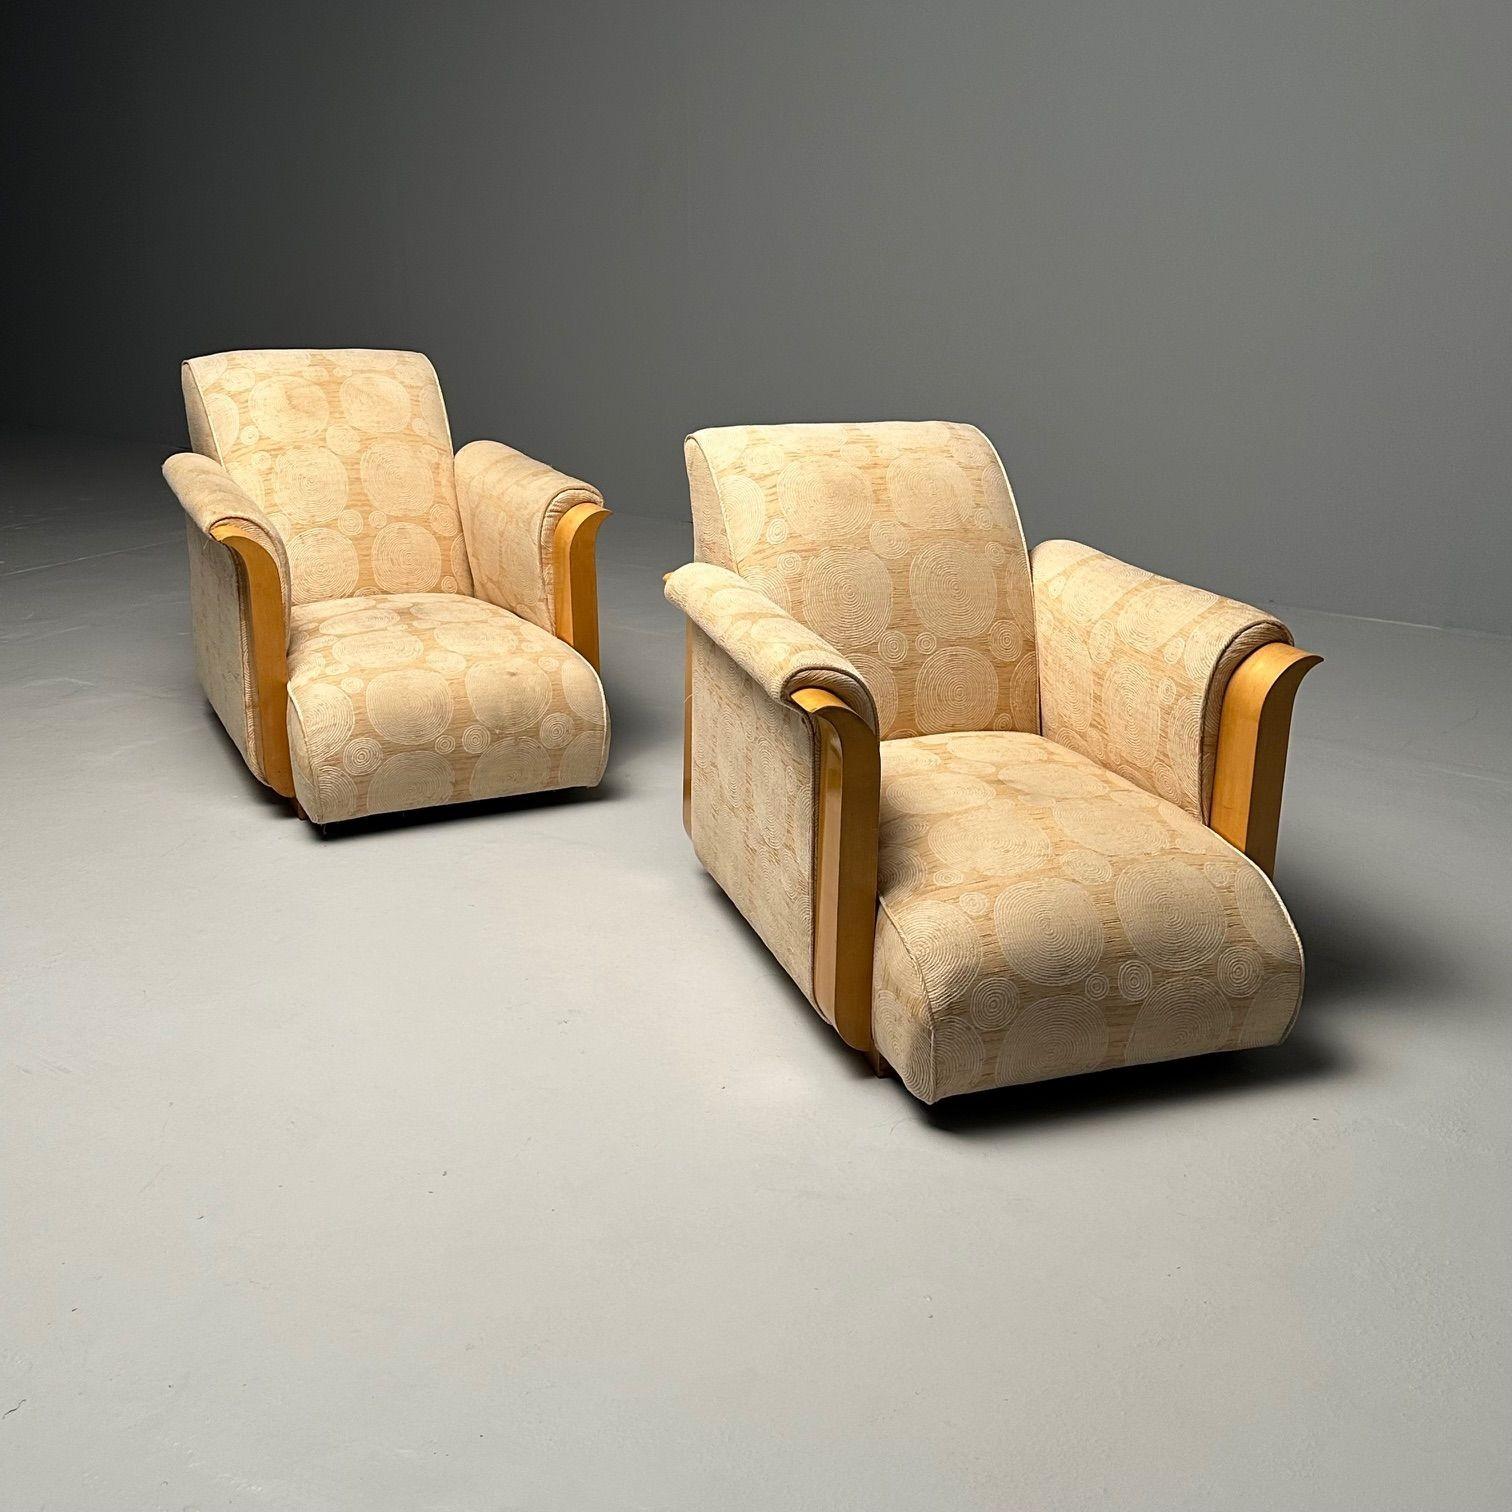 Rare Pair of French Art Deco Lounge Chairs by Michel Dufet, France, 1930s 1